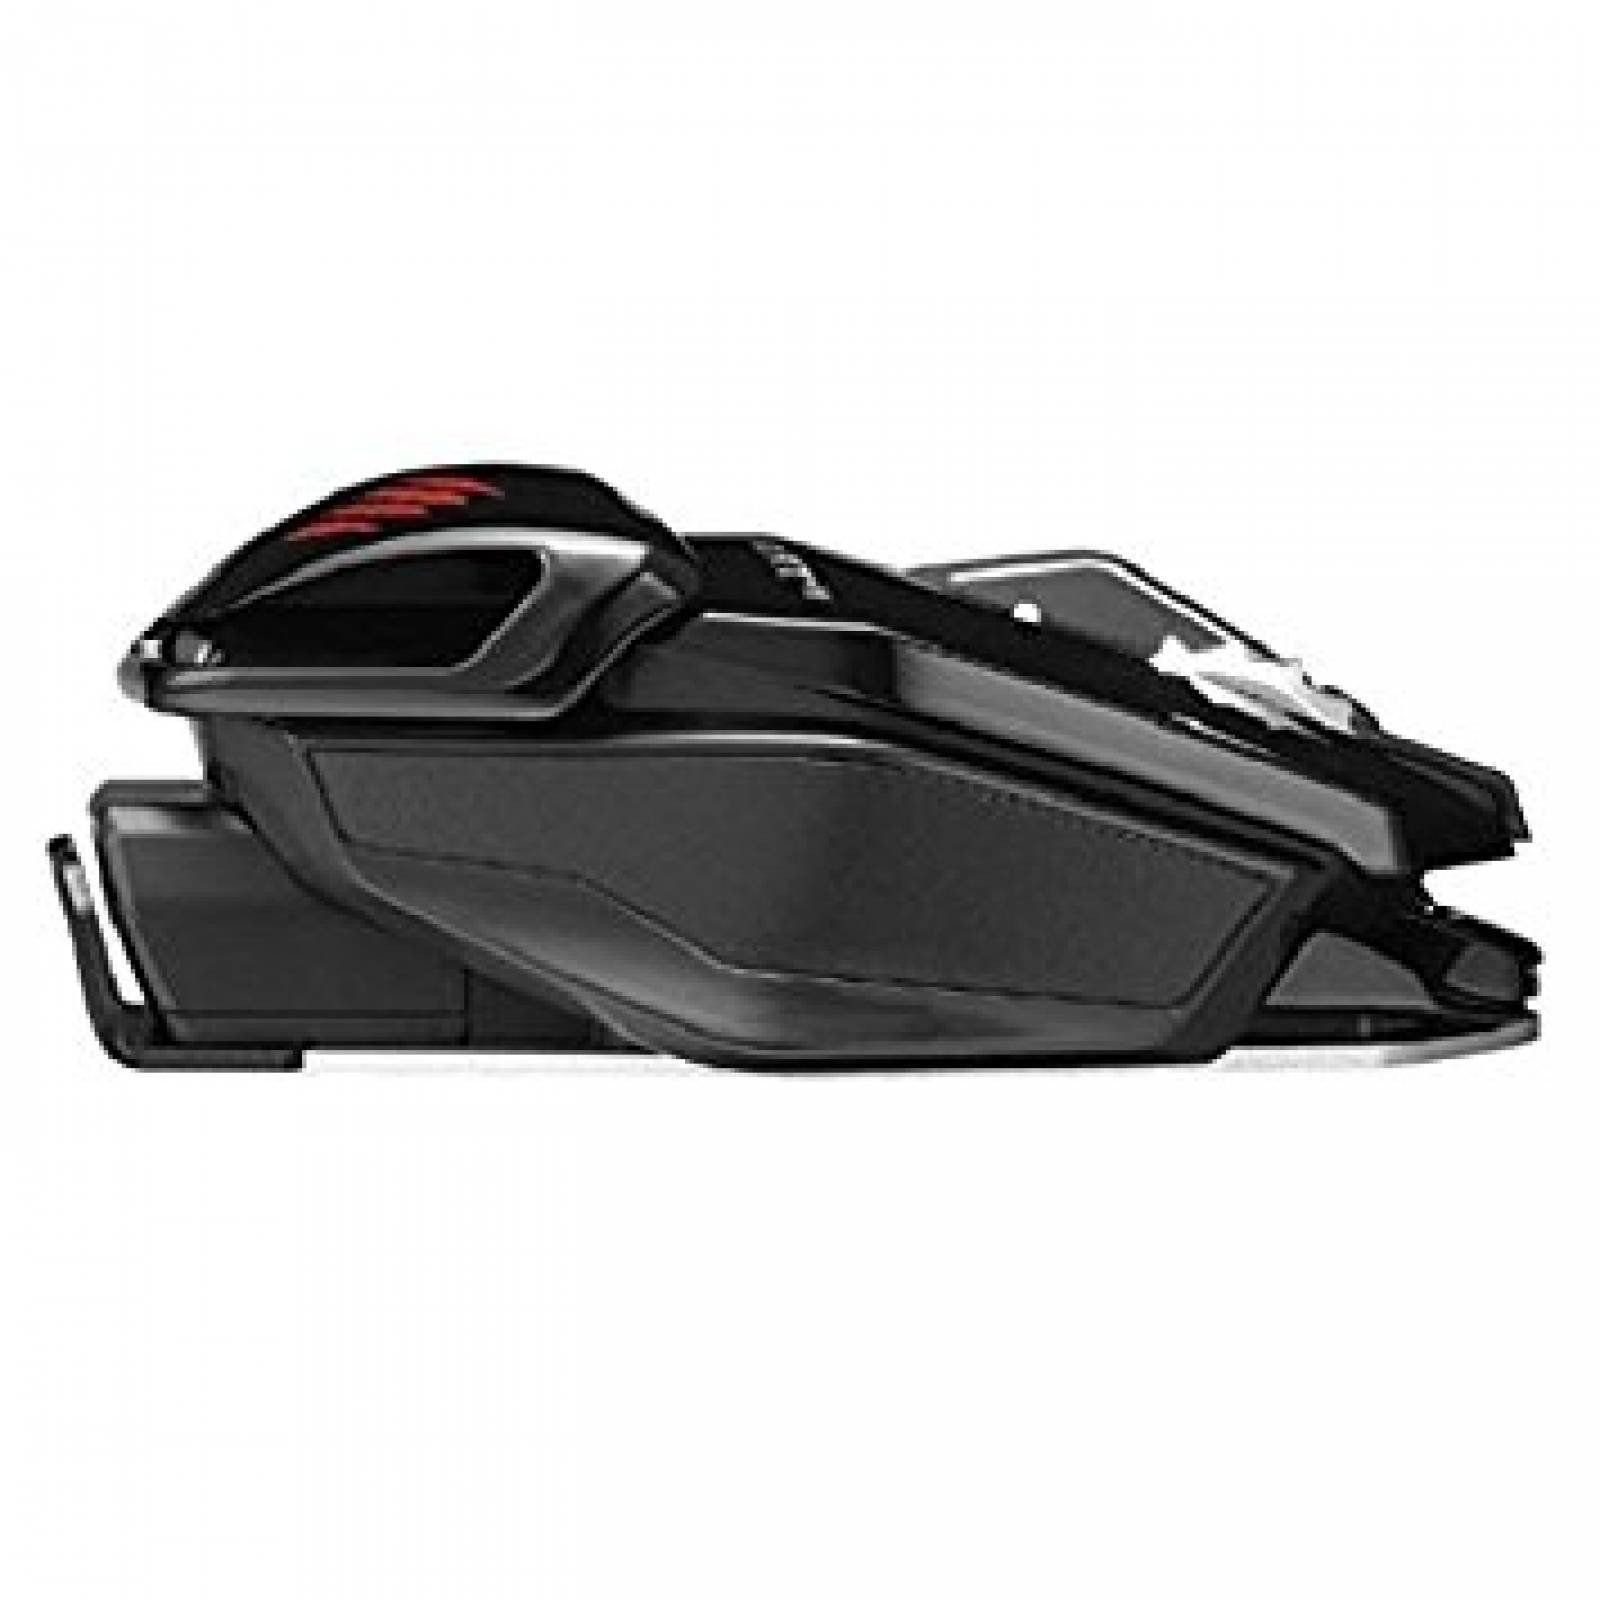 Mad Catz R.A.T. M Wireless Mobile Gaming Mouse PC Mac y móvi